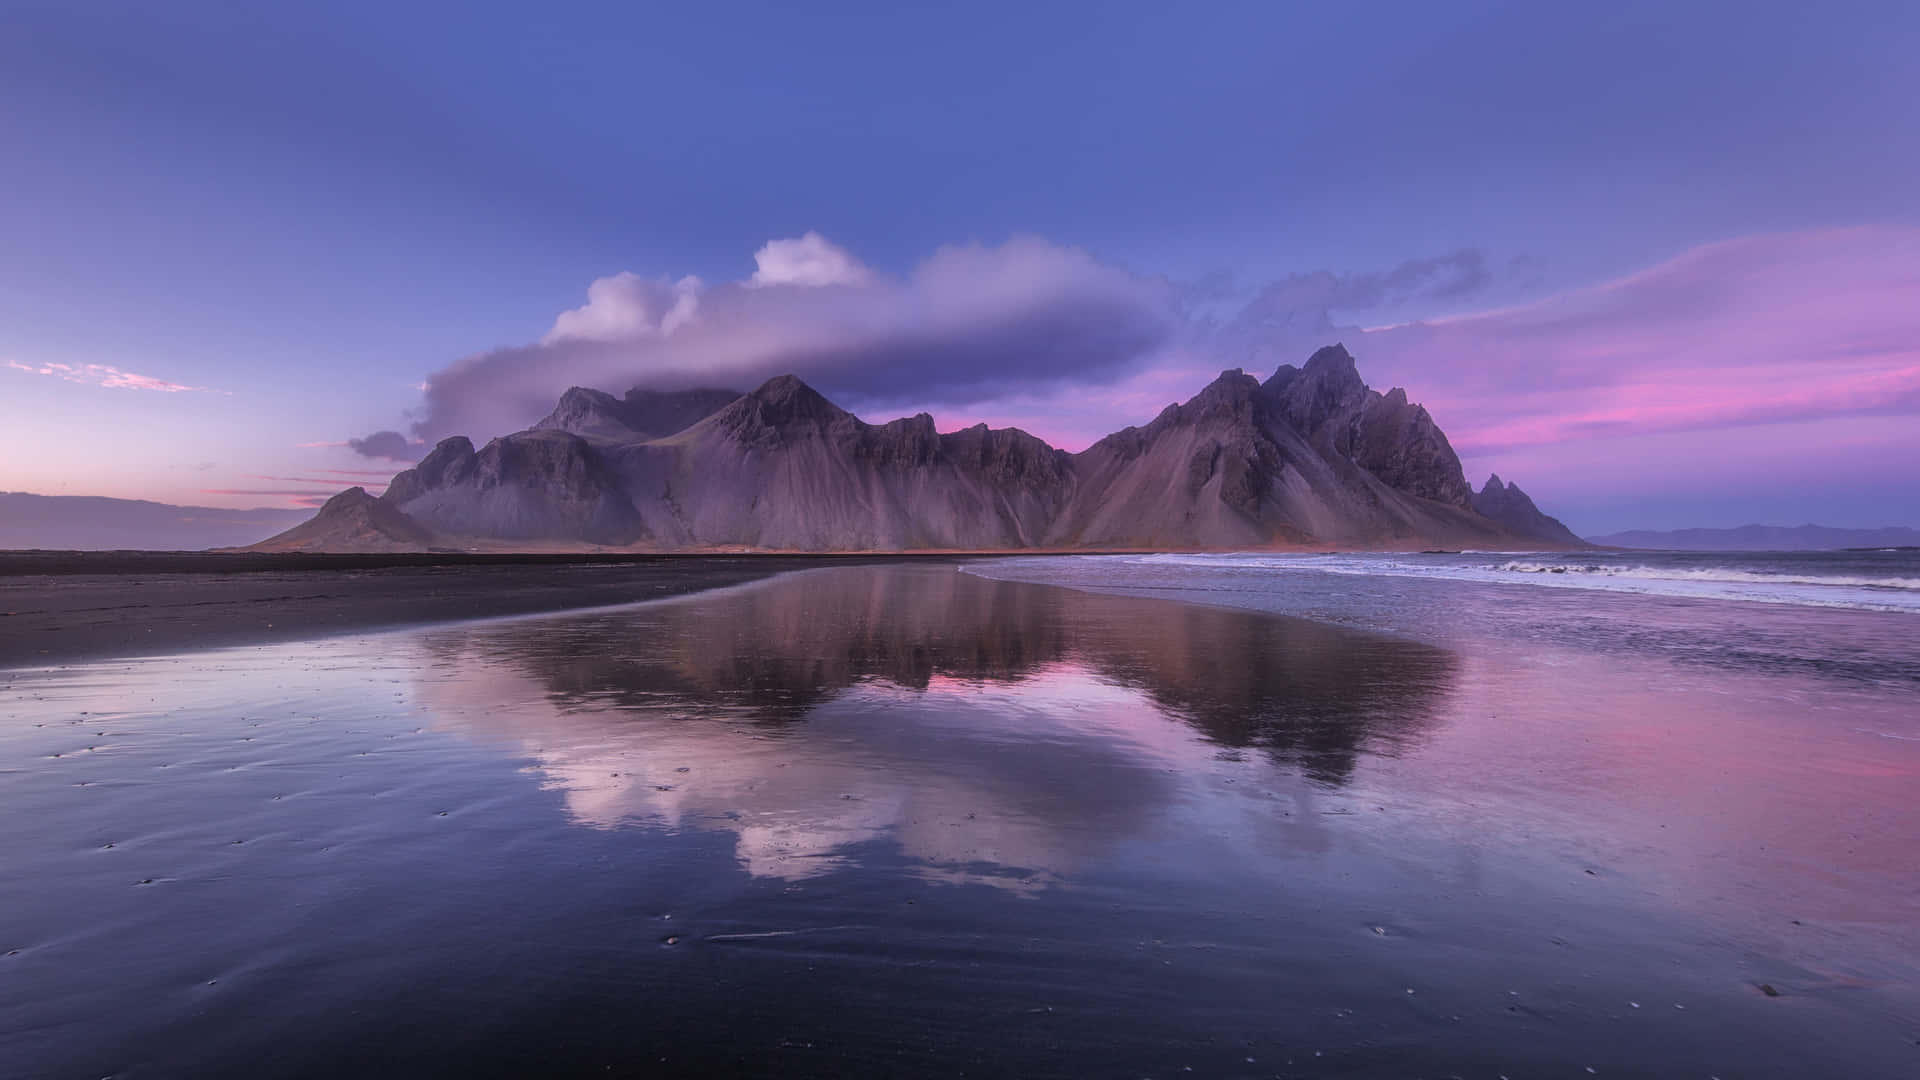 A Mountain Range Is Reflected In The Water At Sunset Wallpaper